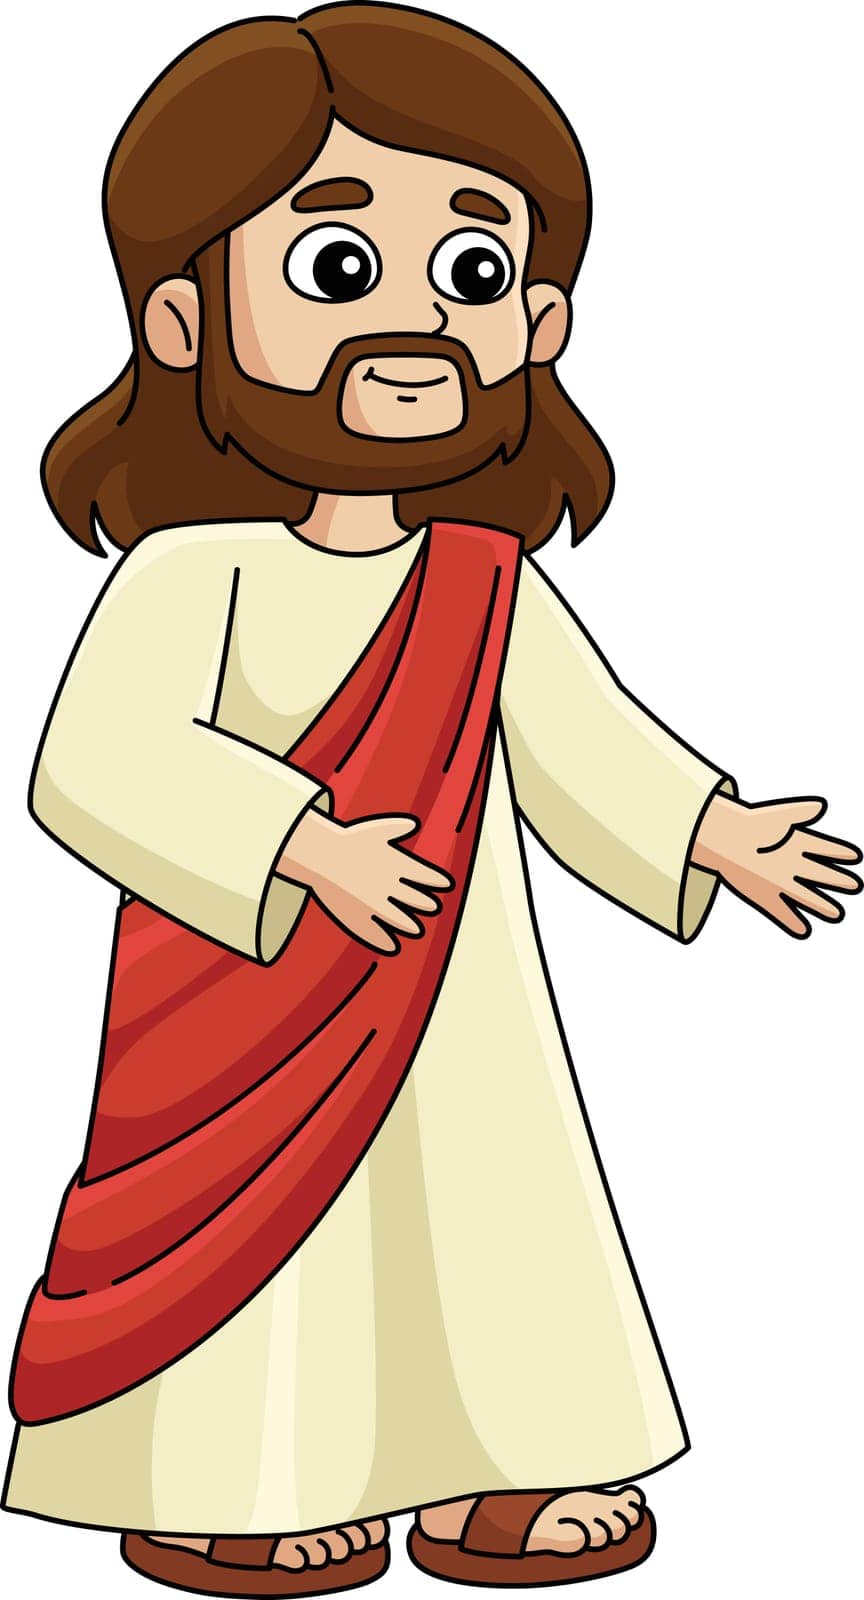 This cartoon clipart shows a Jesus the Messiah illustration.